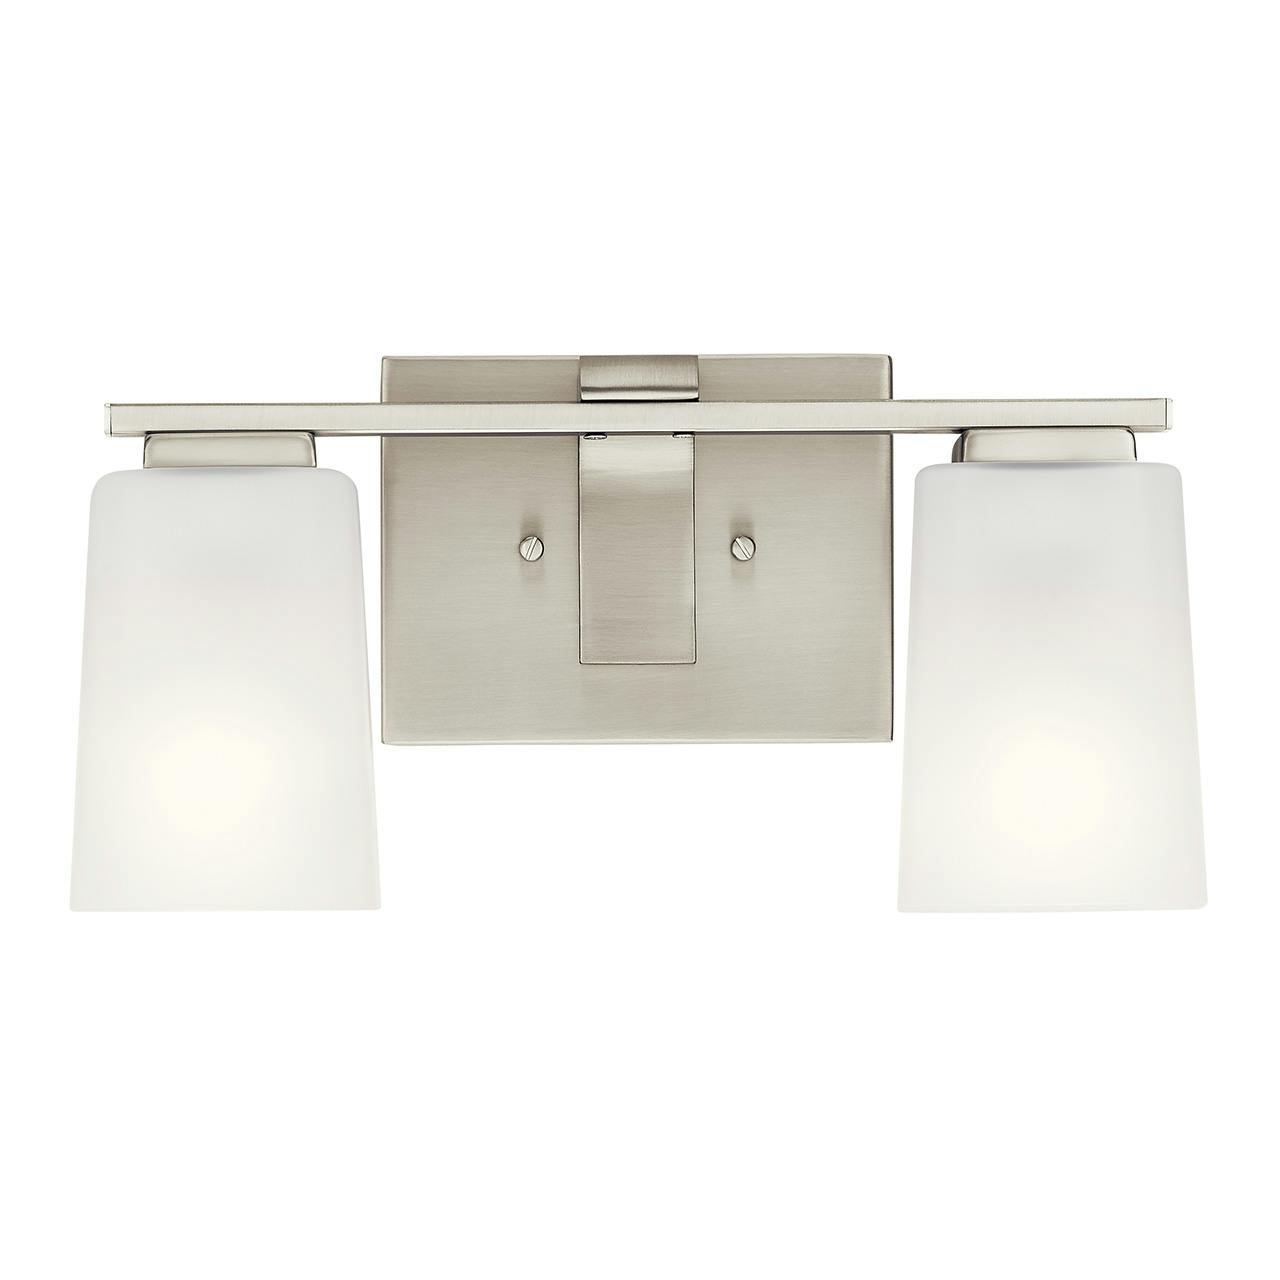 The Roehm 2 Light Vanity Light Brushed Nickel facing down on a white background